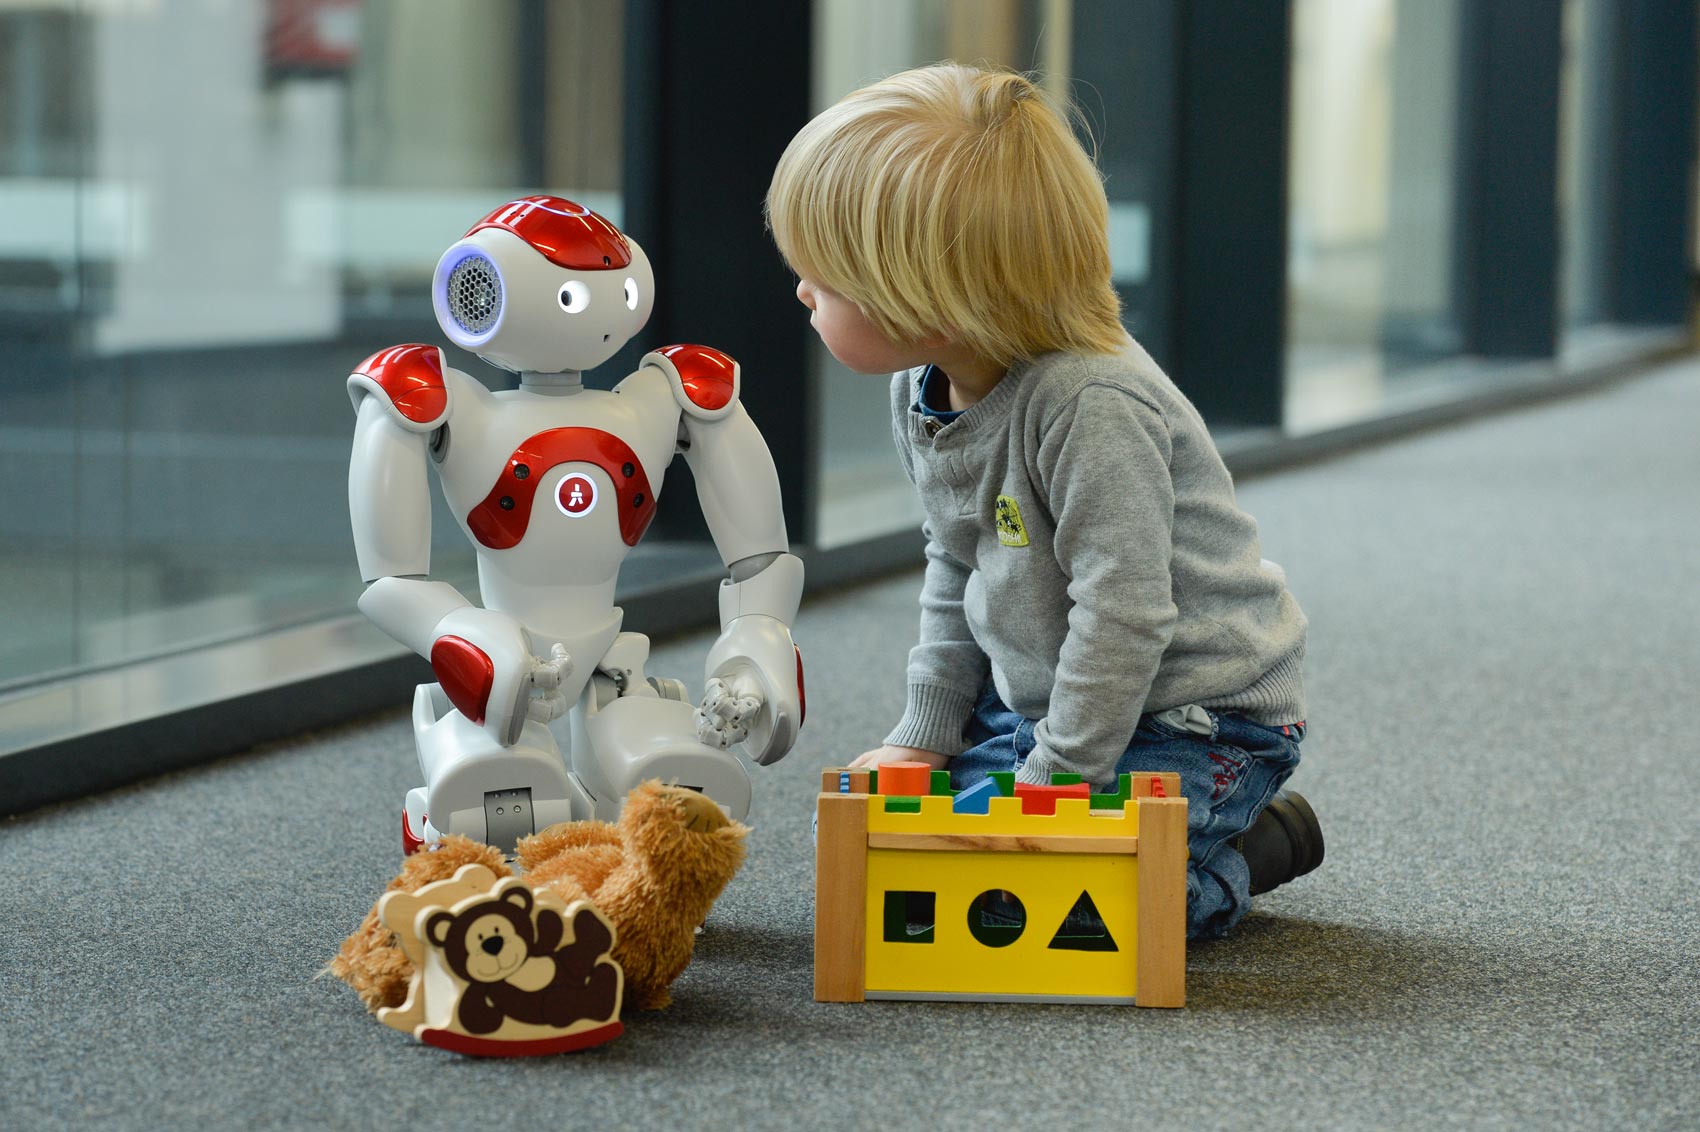 Child and humanoid robot play together